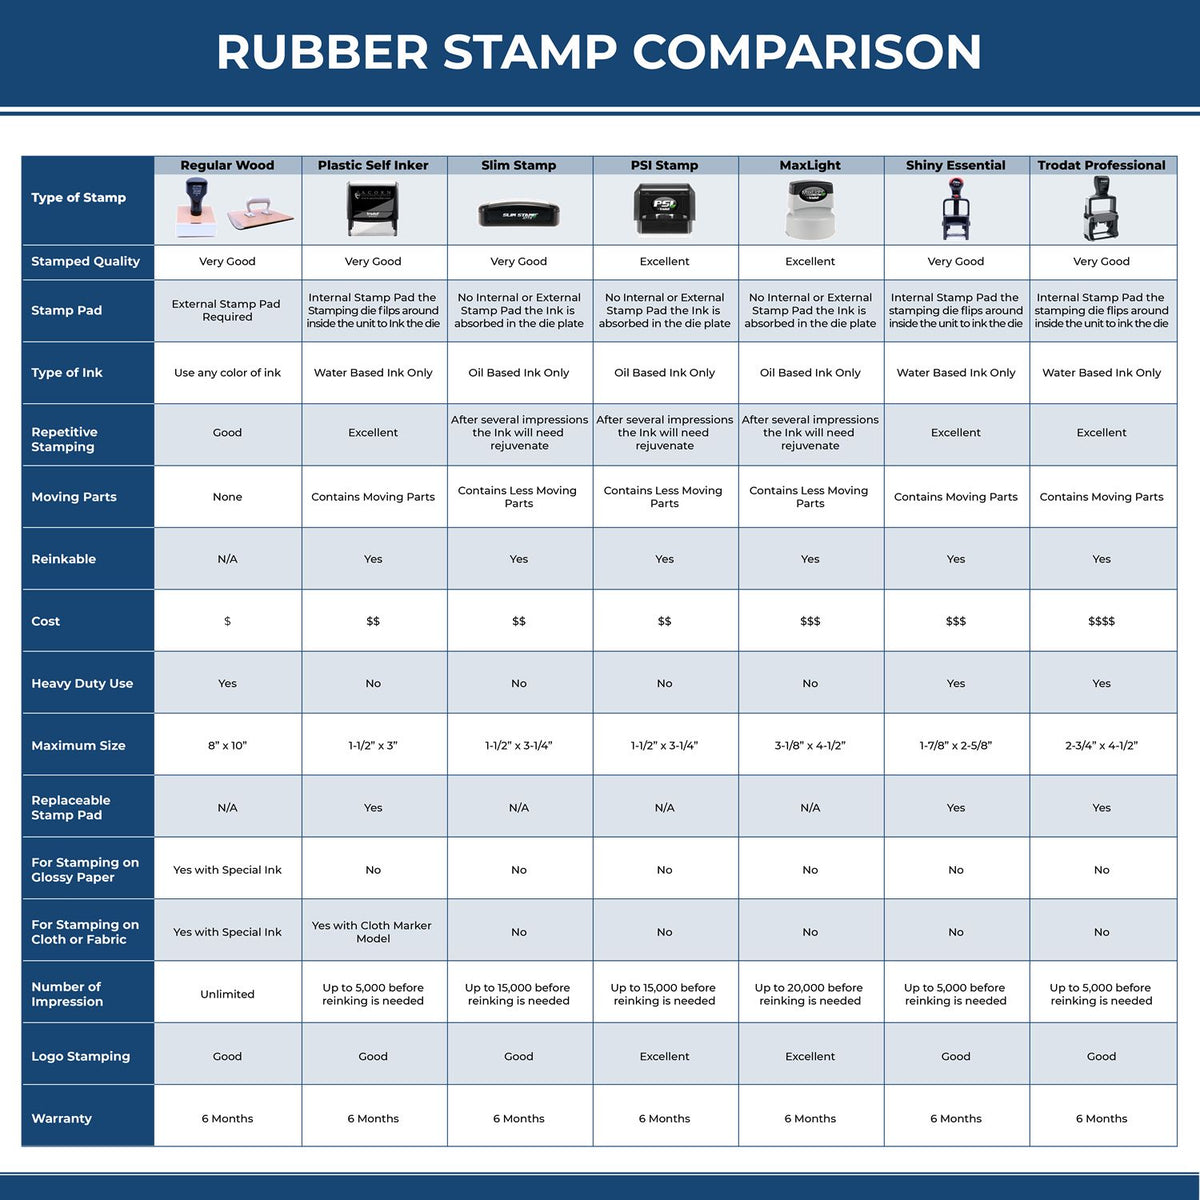 A comparison chart for the different types of mount models available for the Wooden Handle New Jersey State Seal Notary Public Stamp.